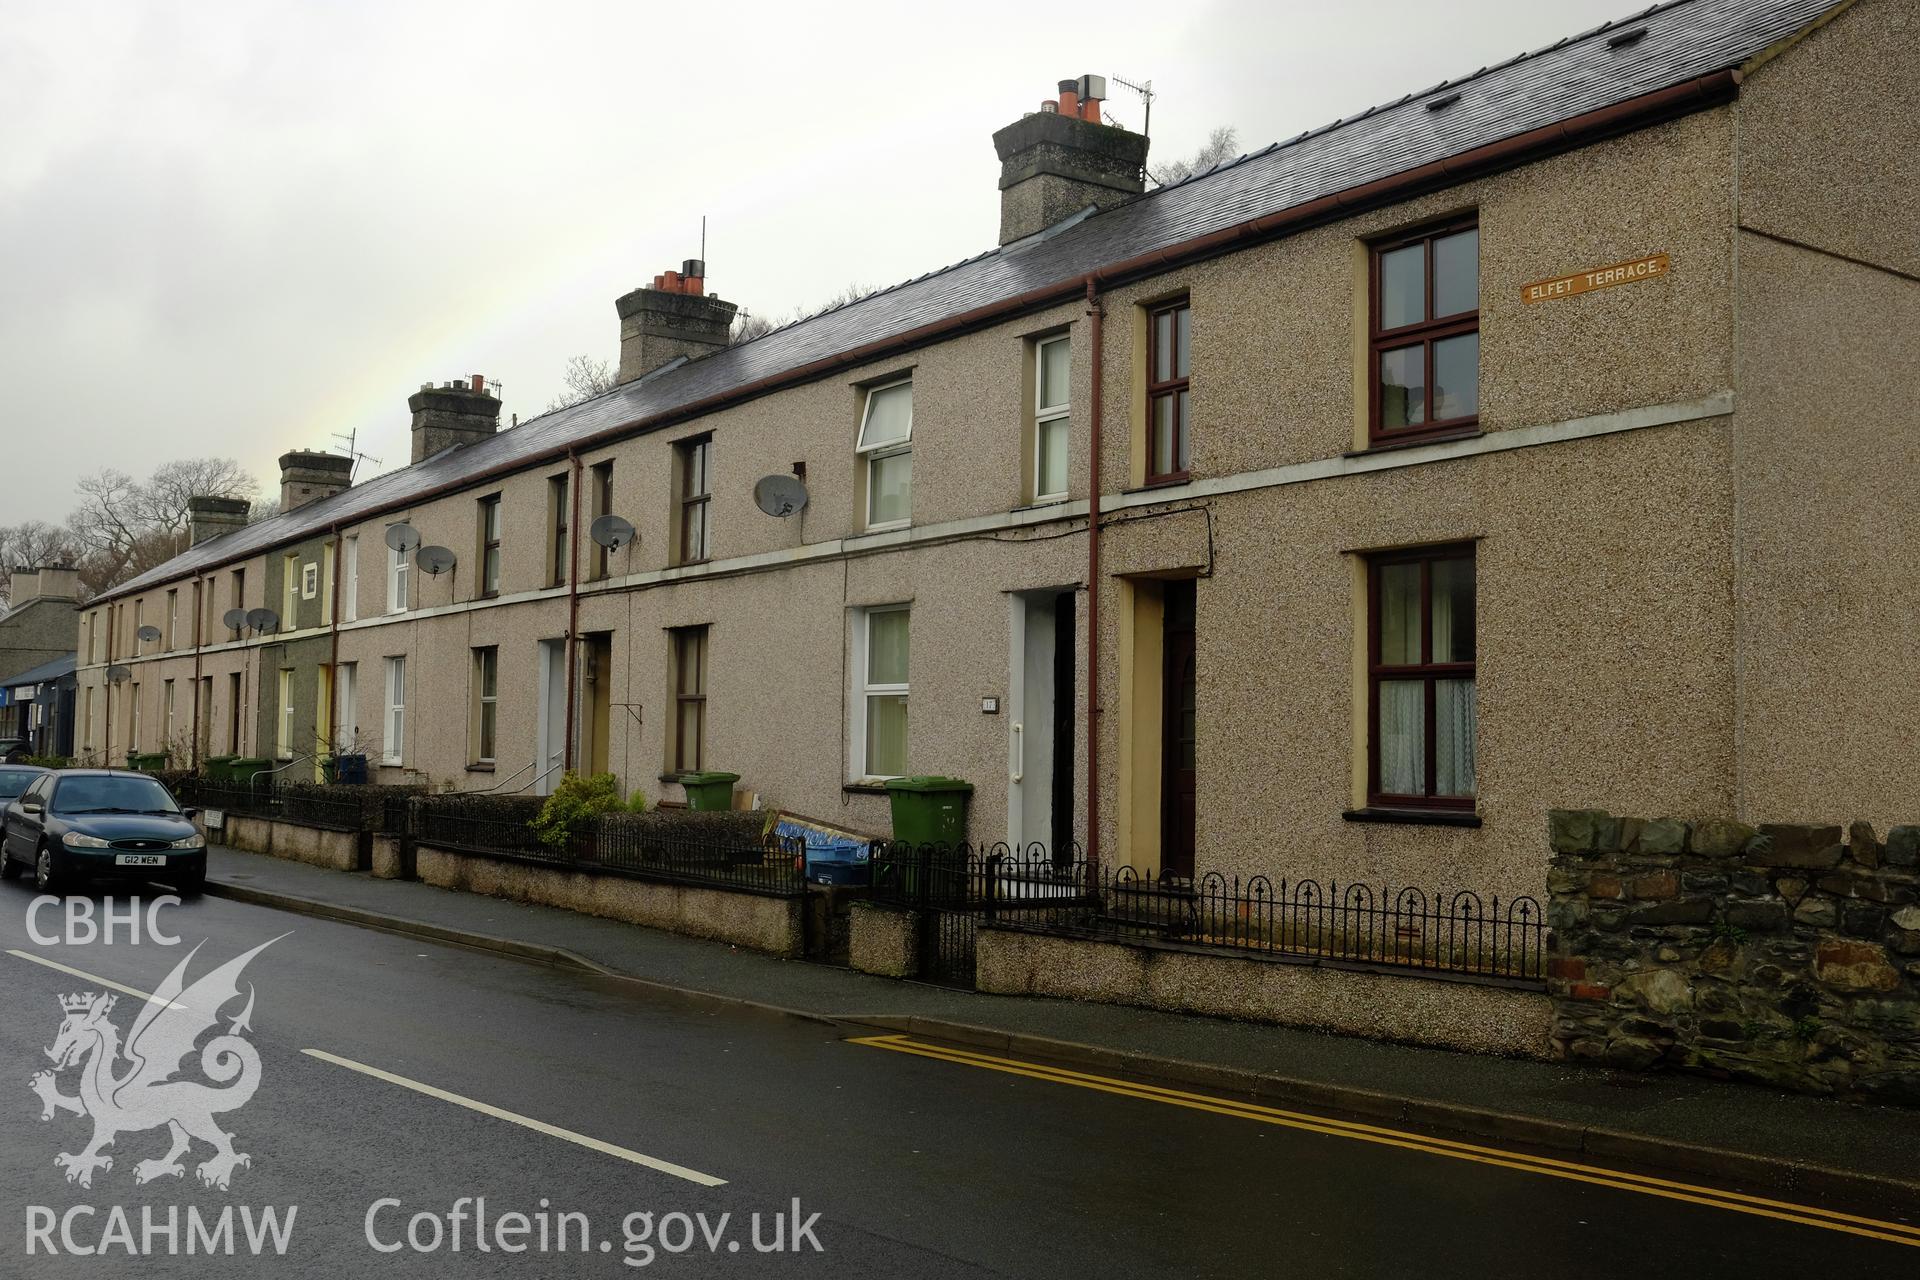 Colour photograph showing view looking north at Elfed Terrace, Bethesda, produced by Richard Hayman 31st January 2017